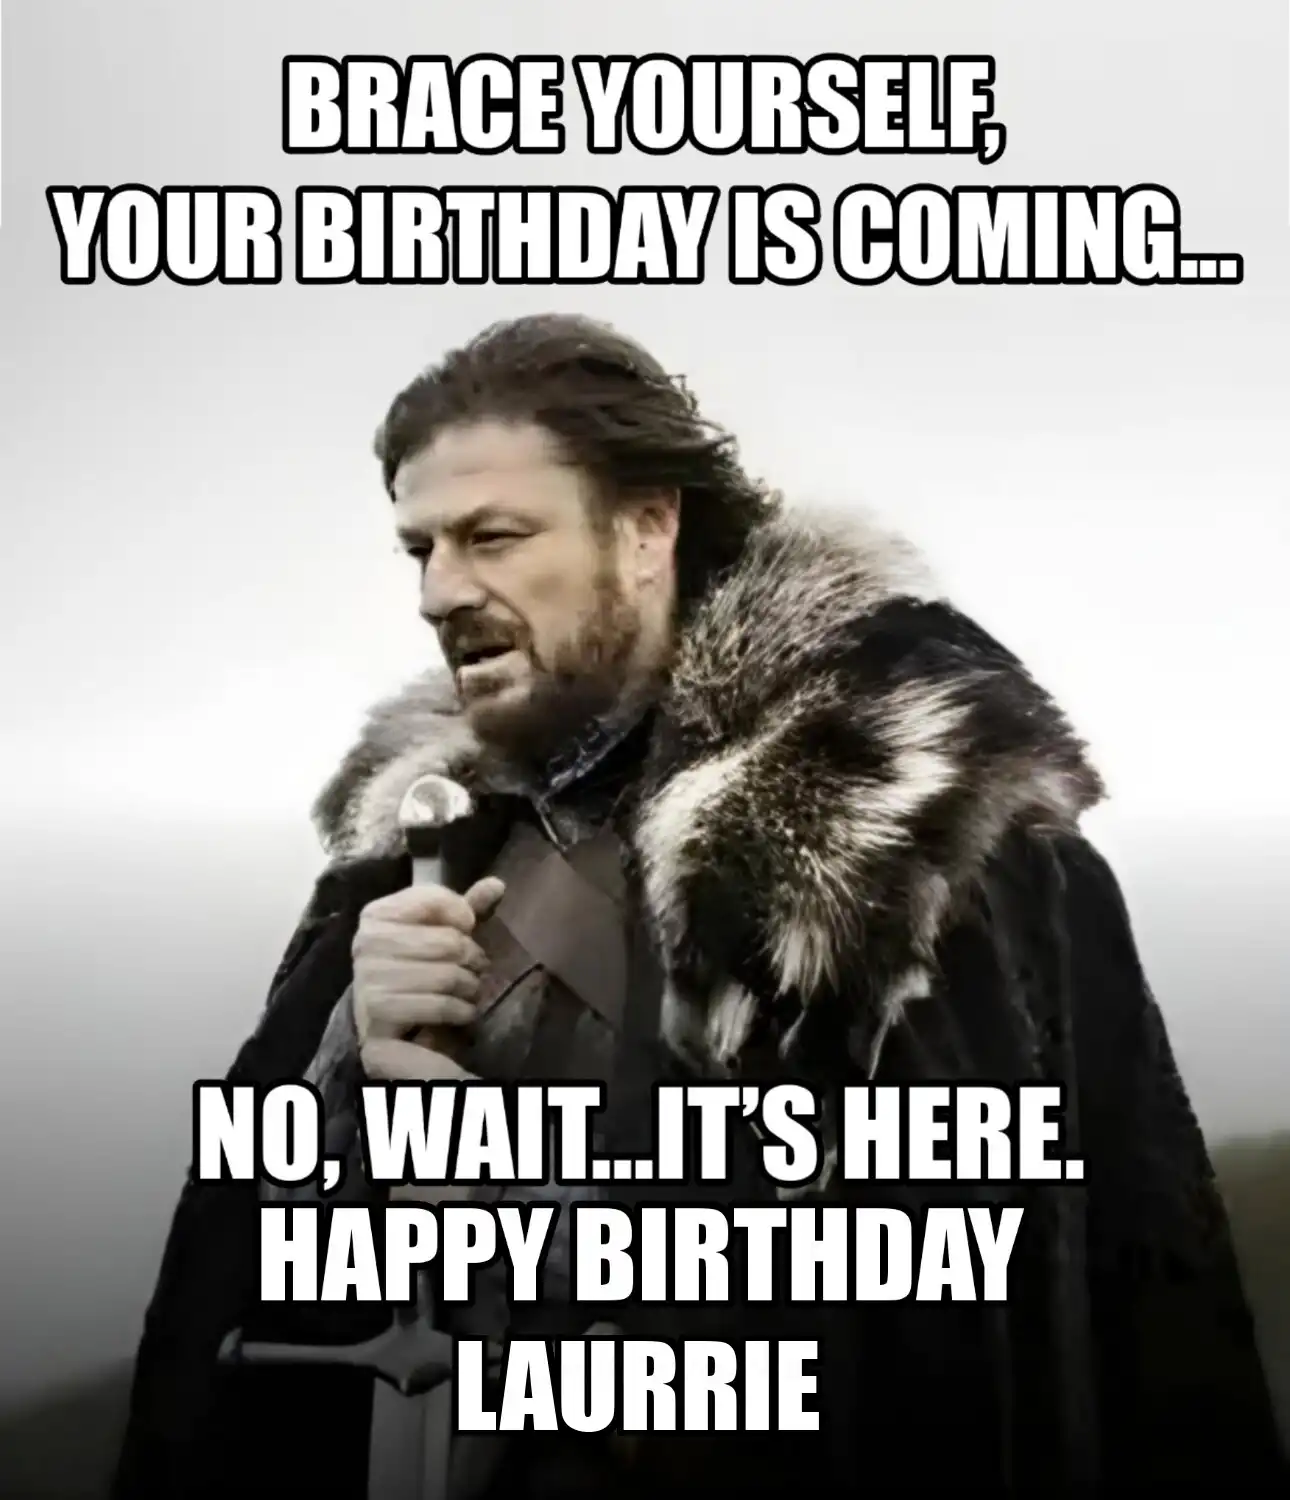 Happy Birthday Laurrie Brace Yourself Your Birthday Is Coming Meme